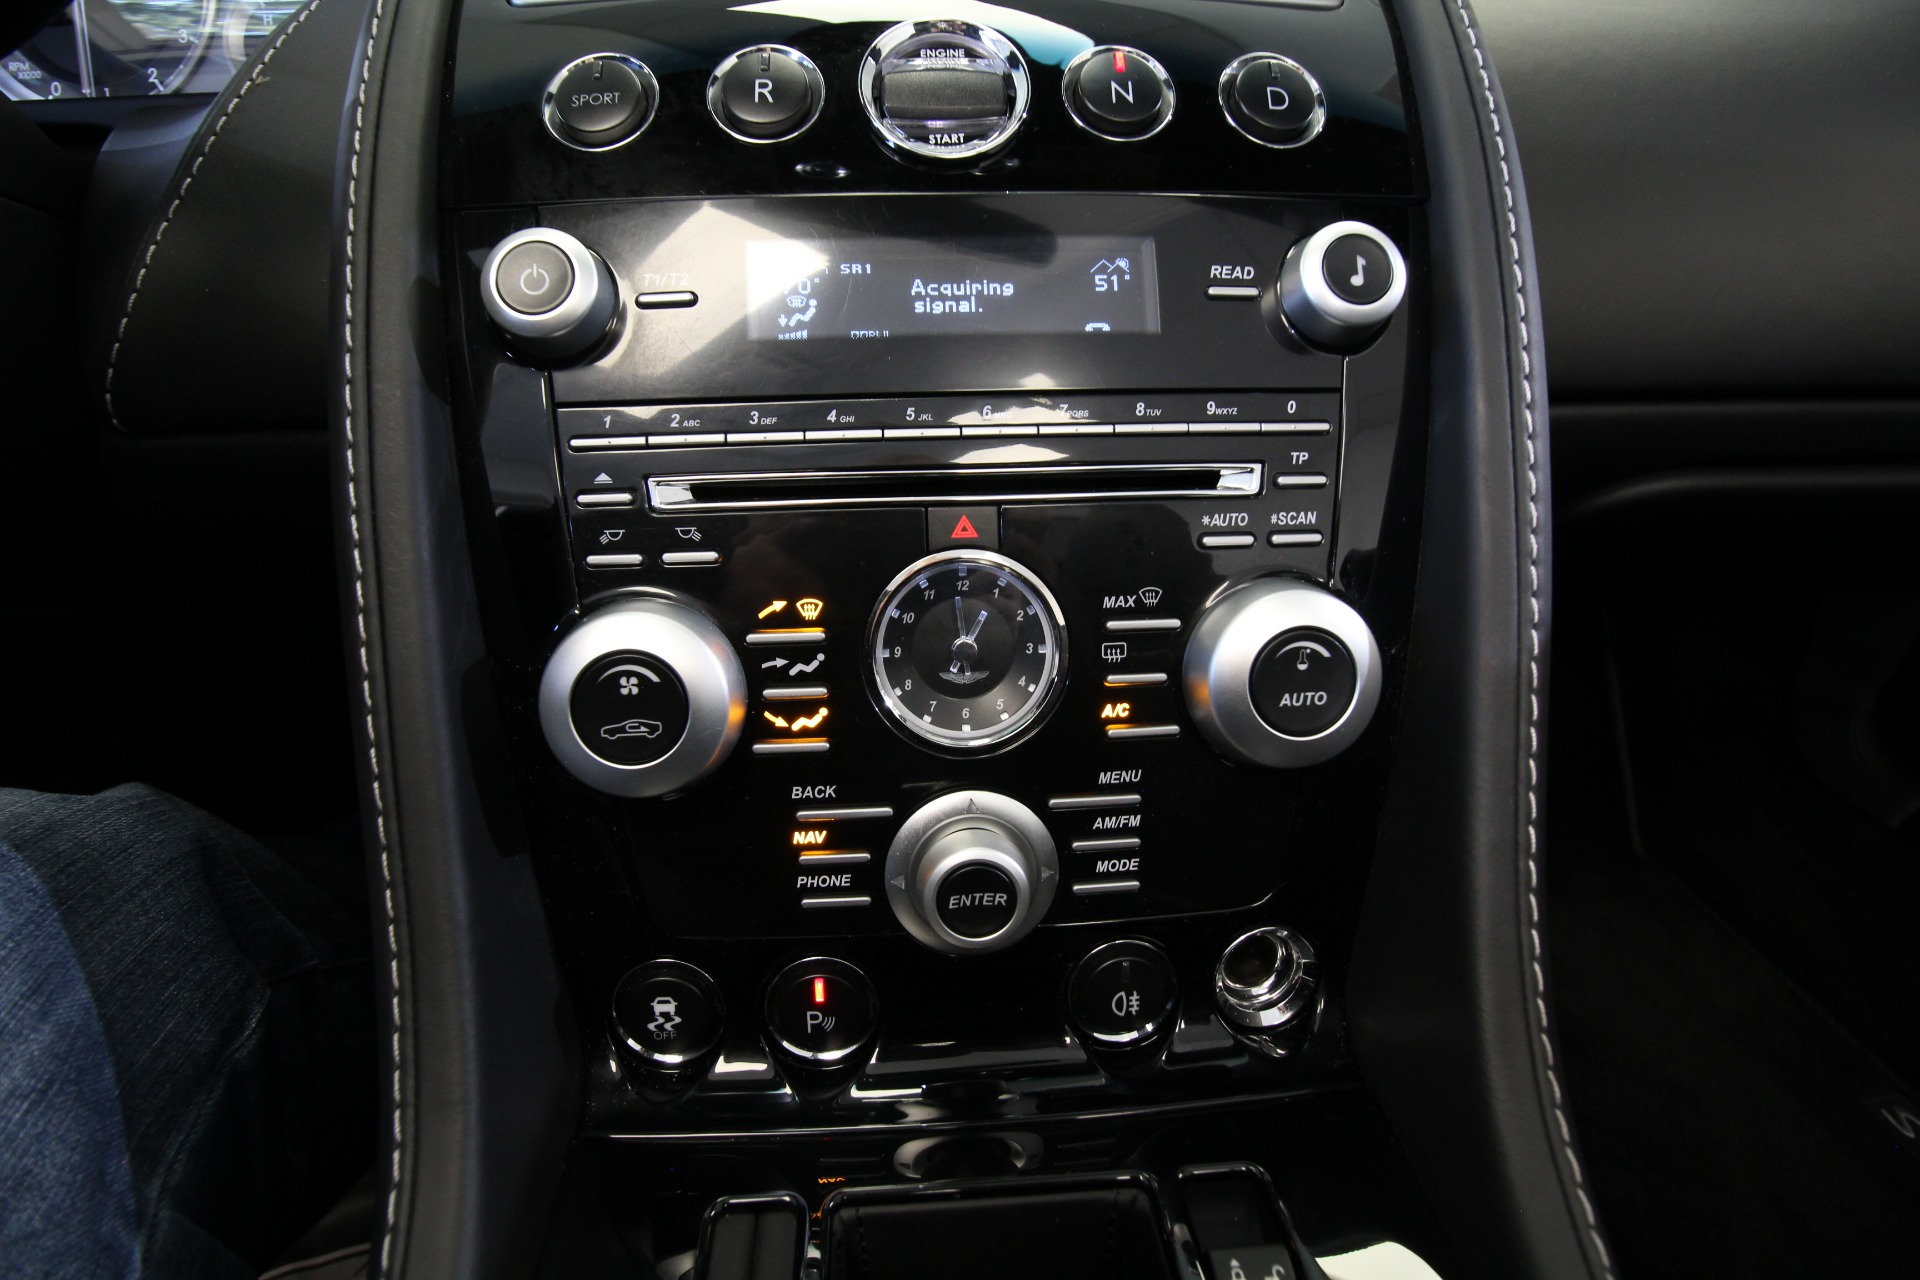 Used 2011 Aston Martin V8 Vantage S S Roadster LIKE NEW LOW MILES JUST TRADED WITH US | Albany, NY